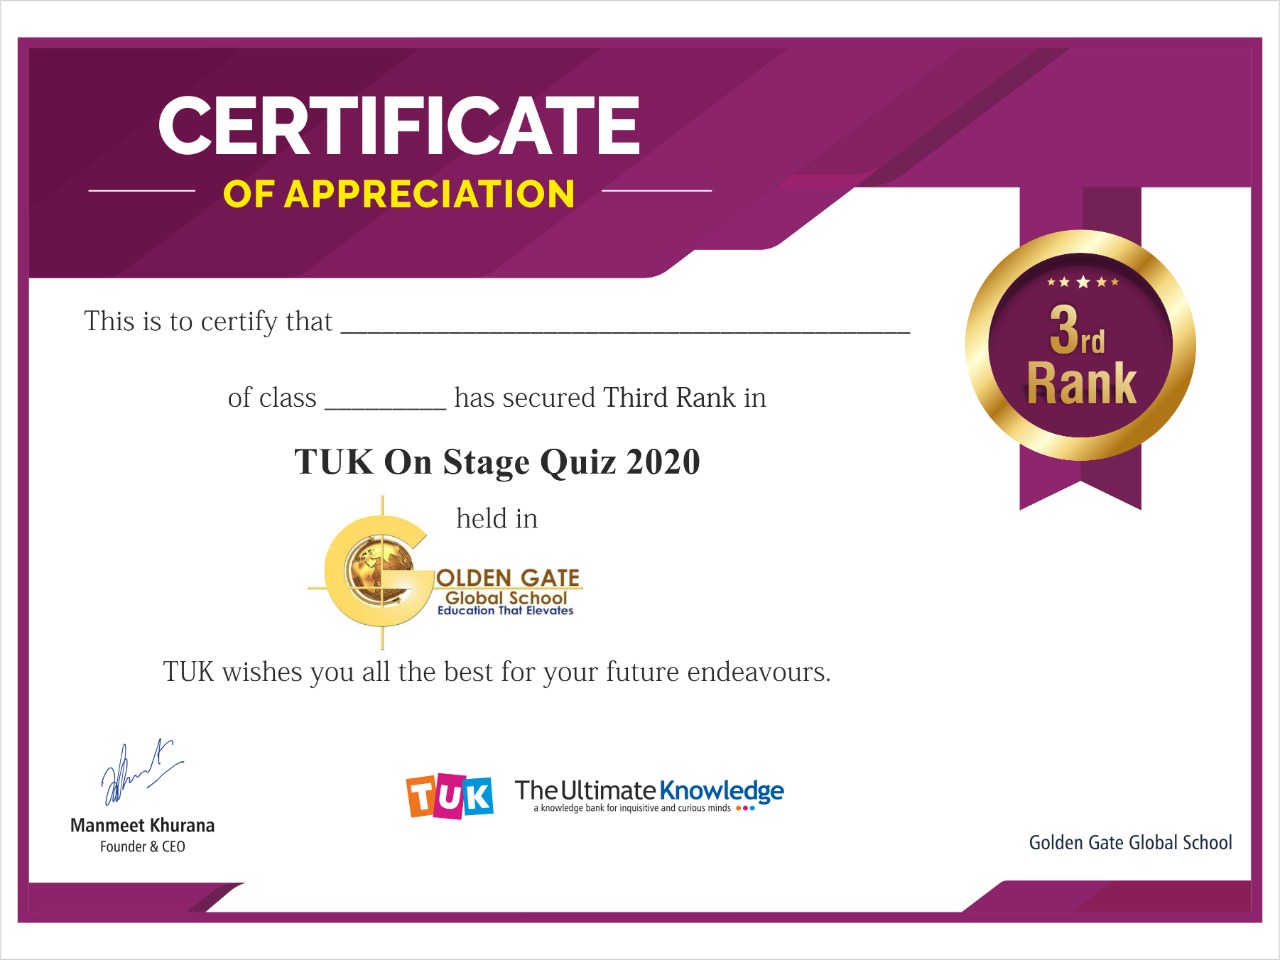 CERTIFICATE

OF APPRECIATION

 

This is to certify that

of class has secured Third Rank in

TUK On Stage Quiz 2020

held in

ER
Ga OLDEN GATE
~~

Global School
uc anon That frevoles

TUK wishes you all the best for your future endeavours.

¥ ma The Ultimate Knowledge
Manmeet Khurana
Founce: & (0 Golden Gate Global Schoo!